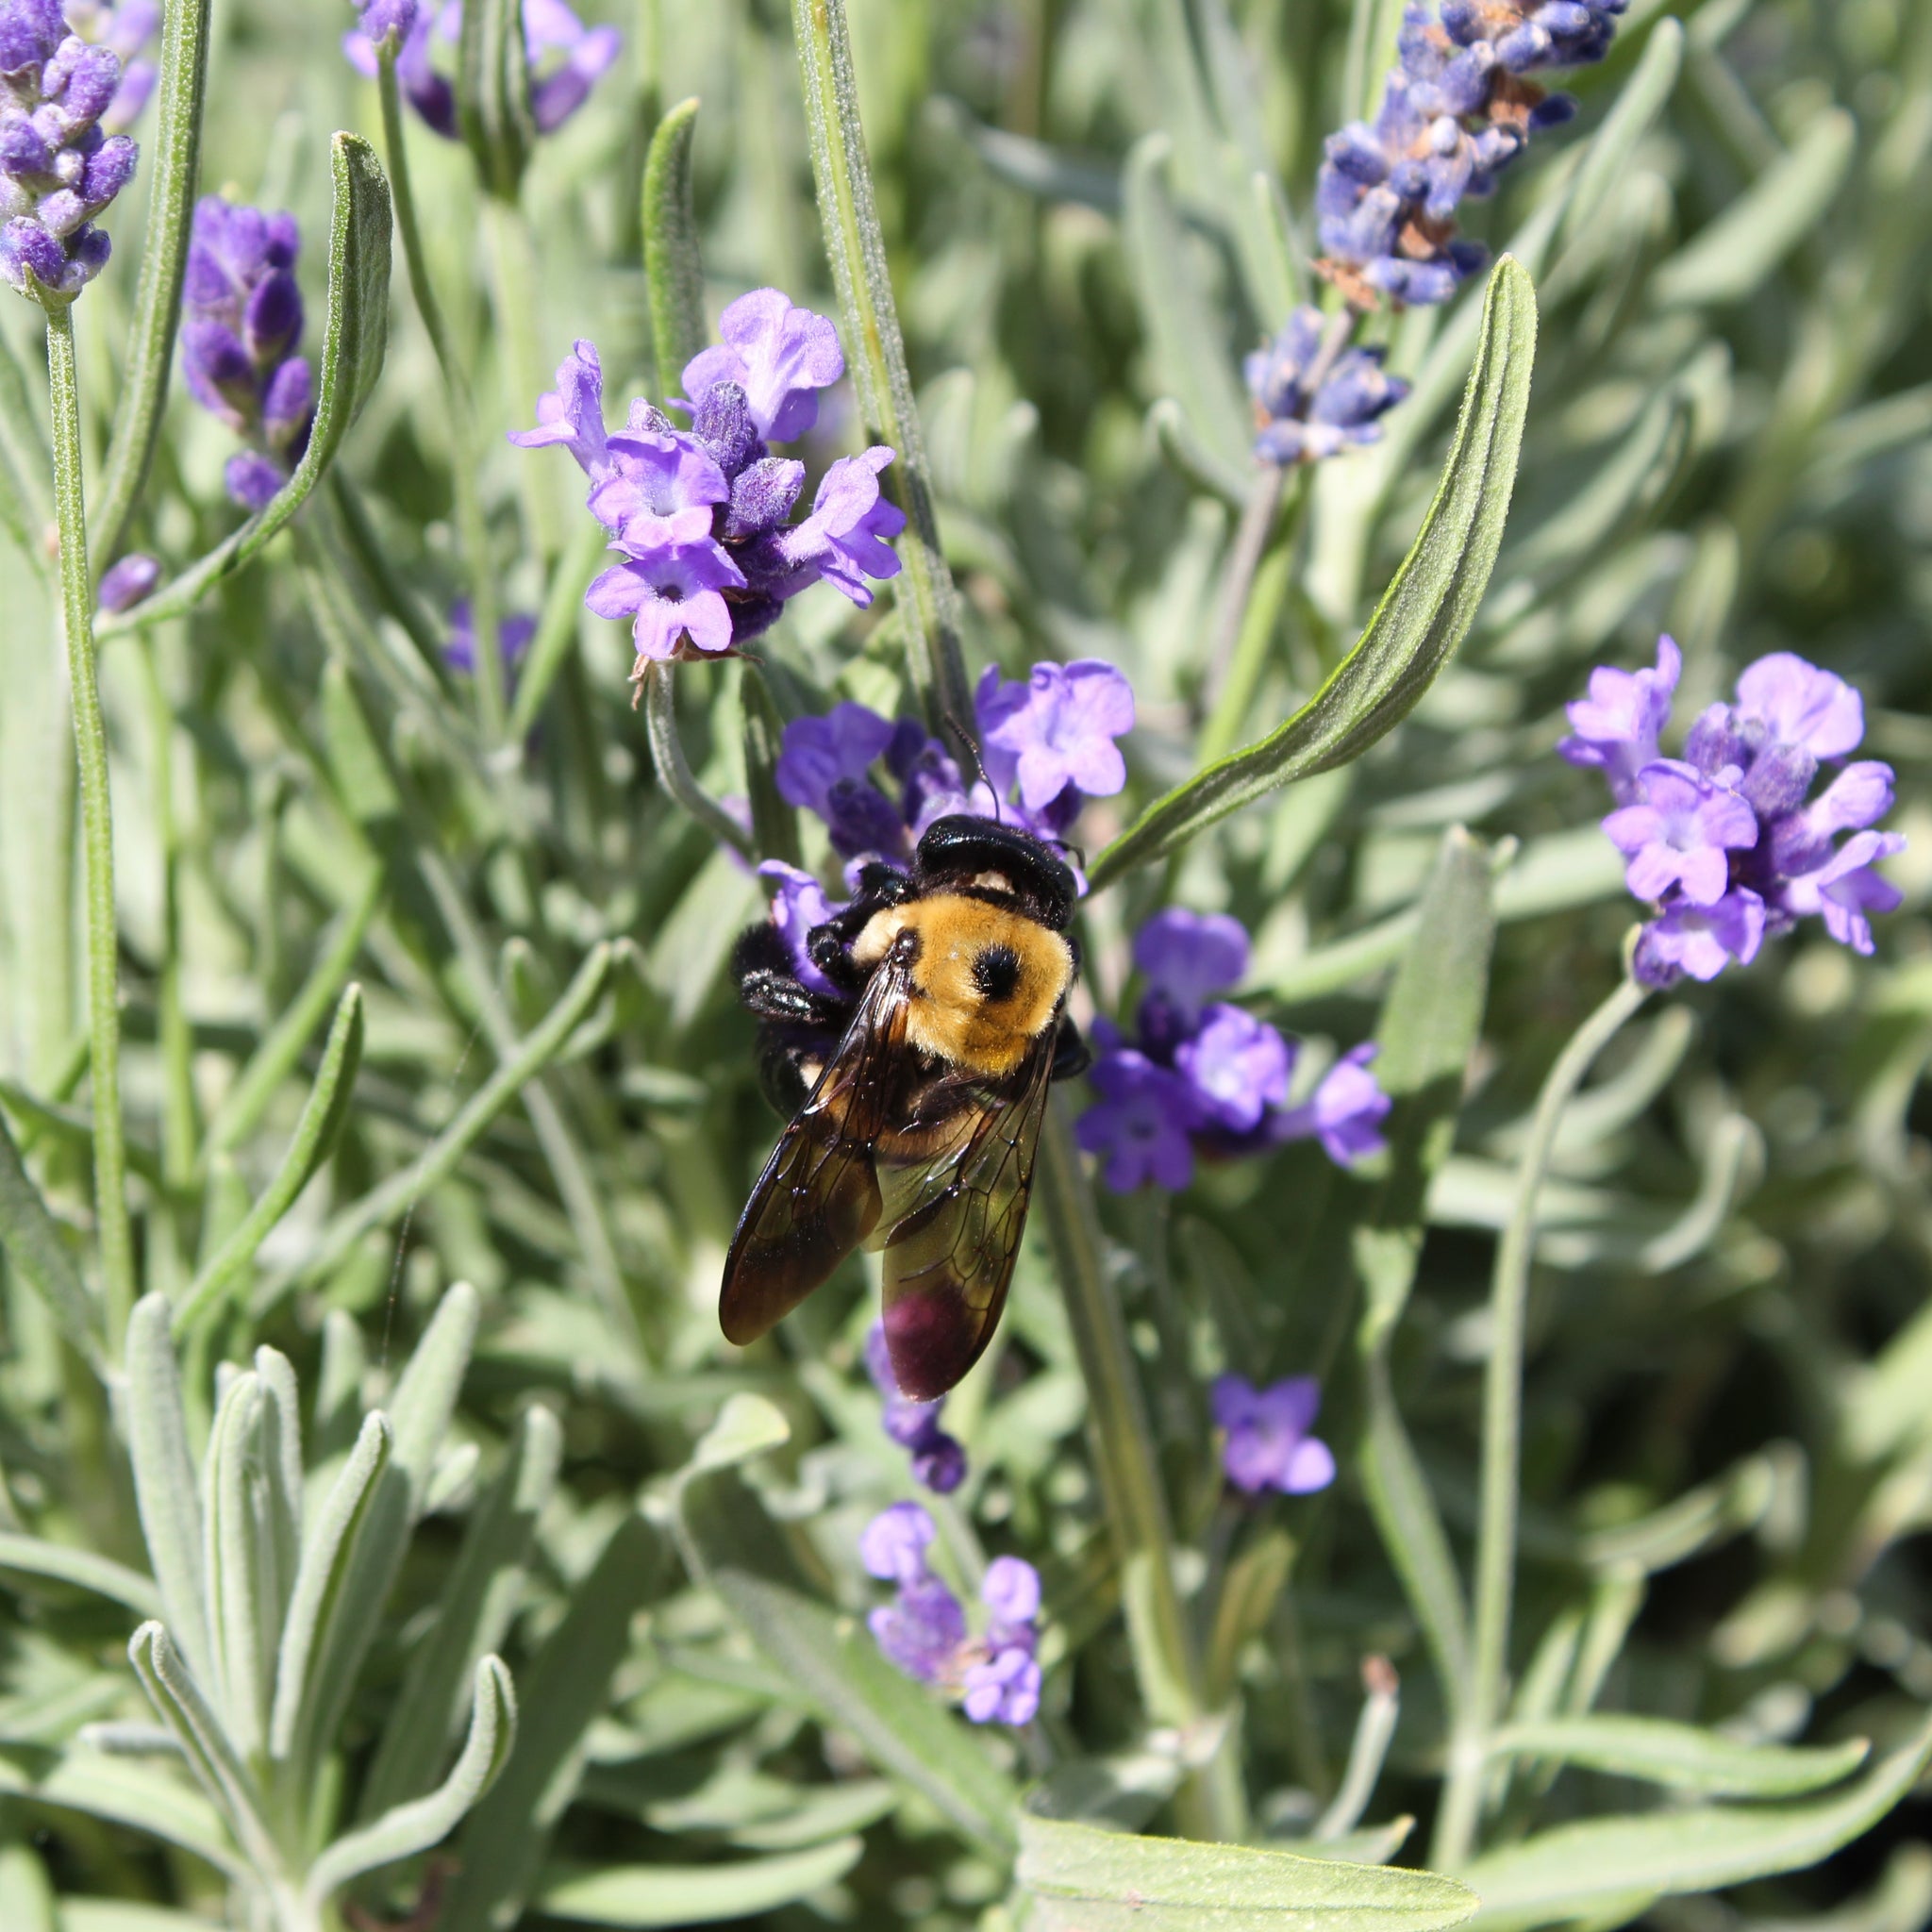 Helping Out the Little Guys: Attracting Pollinators toYour Garden